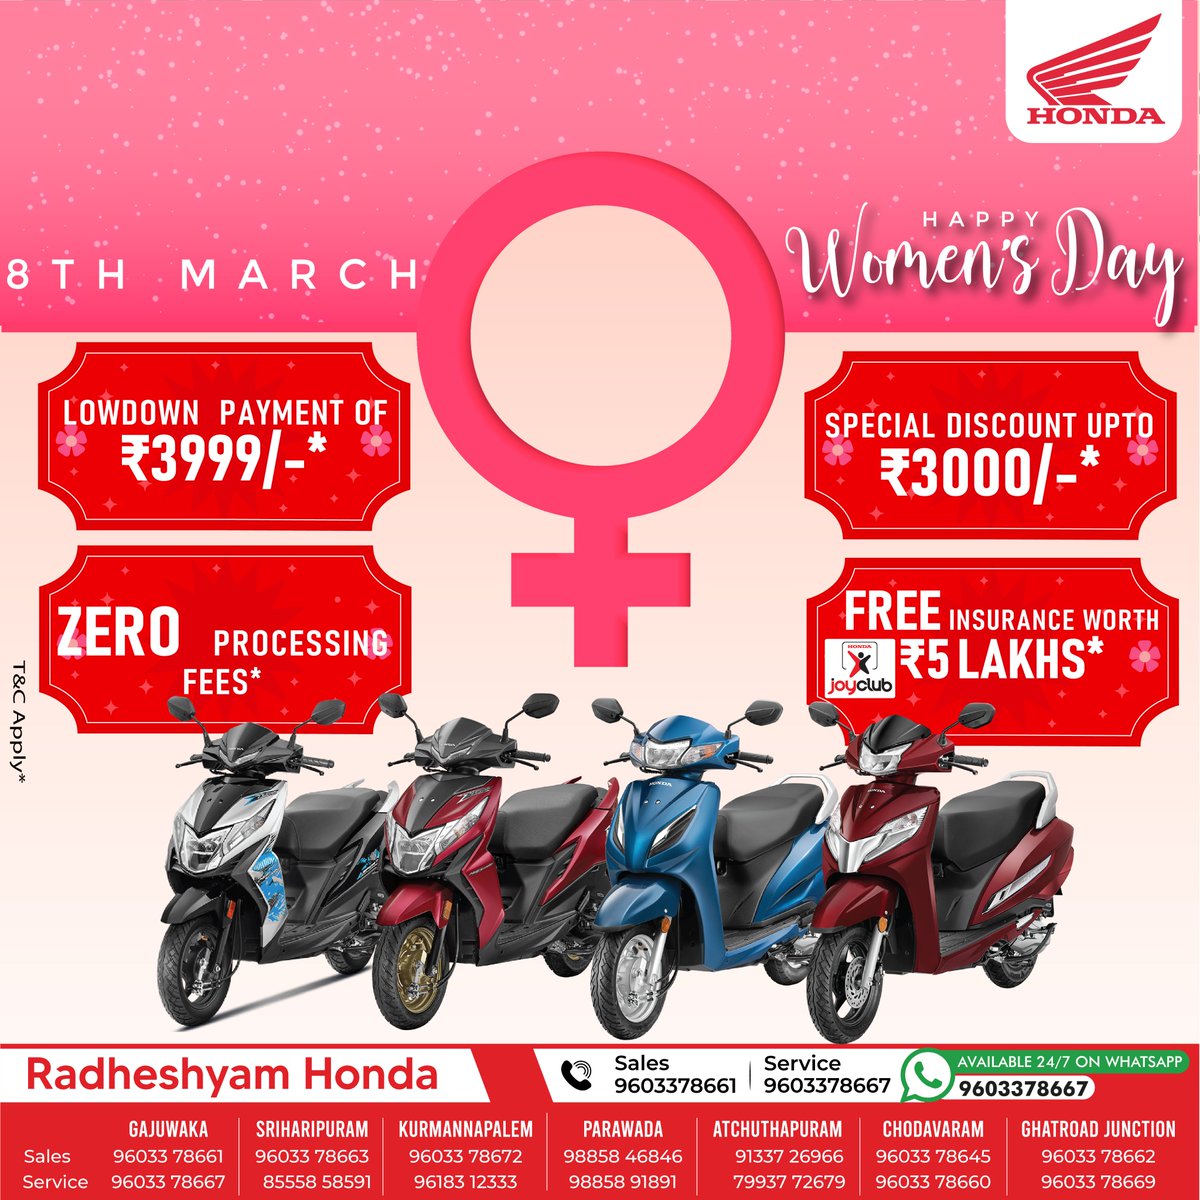 Today and every day, we celebrate the strength, resilience, and achievements of women all around the world. Happy International Women's Day!
Buy #HondaScooters  at a Low Down Payment of ₹3999/-, Special Discount upto ₹3000/-, Zero Processing Fees,